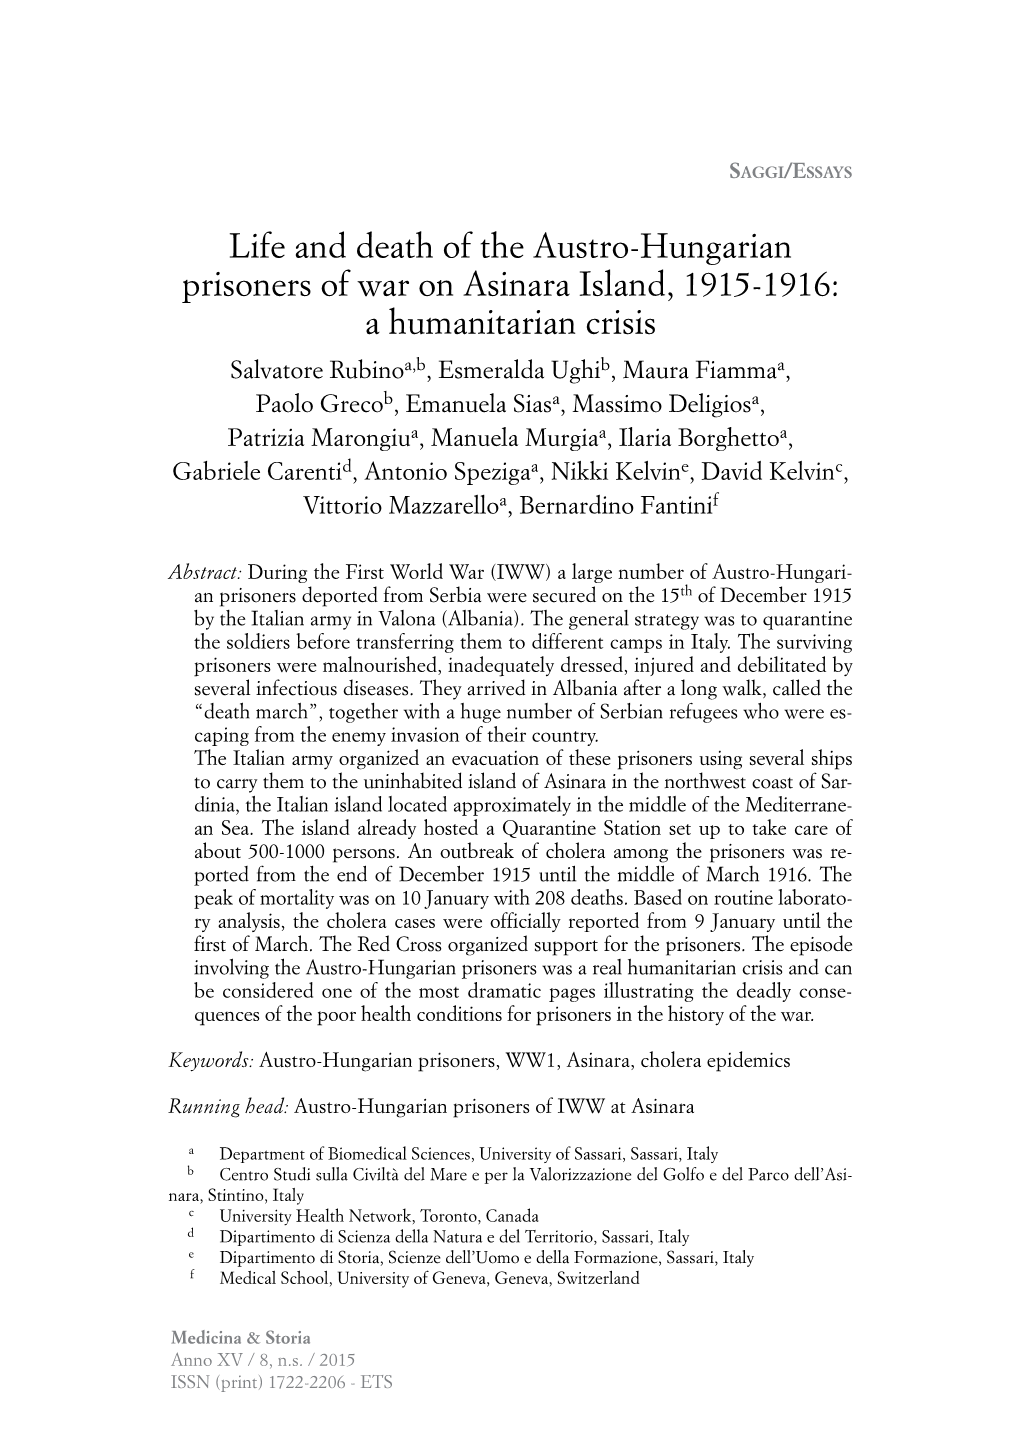 Life and Death of the Austro-Hungarian Prisoners of War